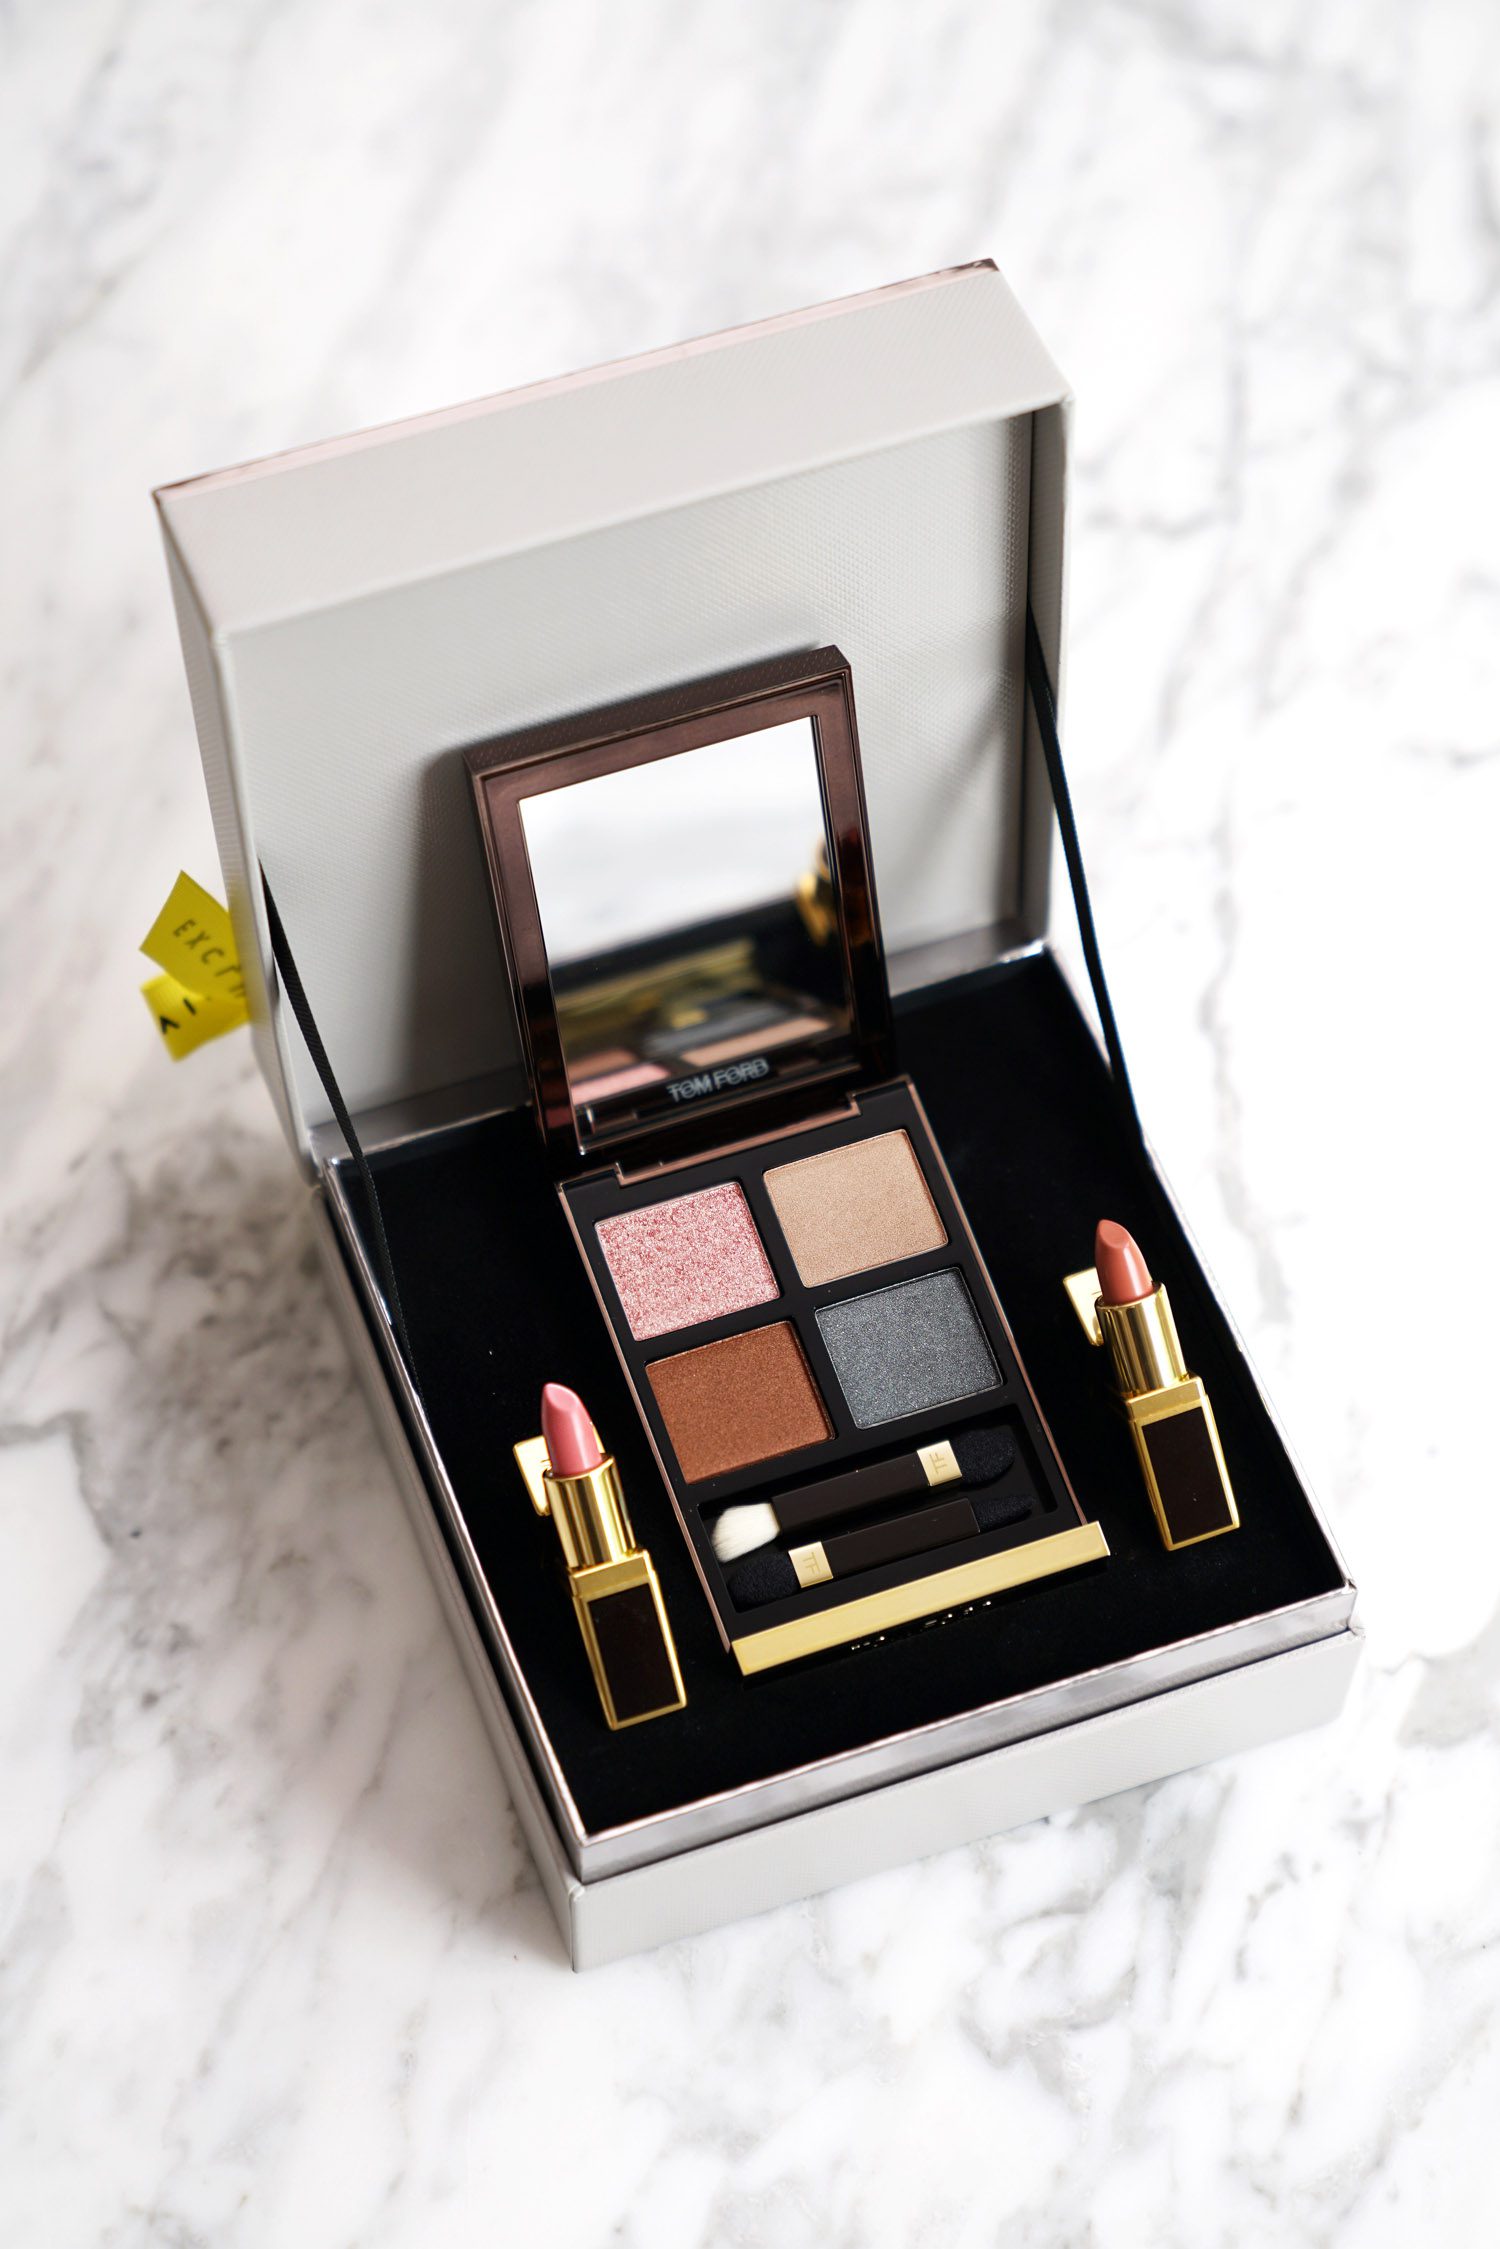 Tom Ford x Nordstrom Eye and Mini Lip Set 2019 - The Beauty Look Book